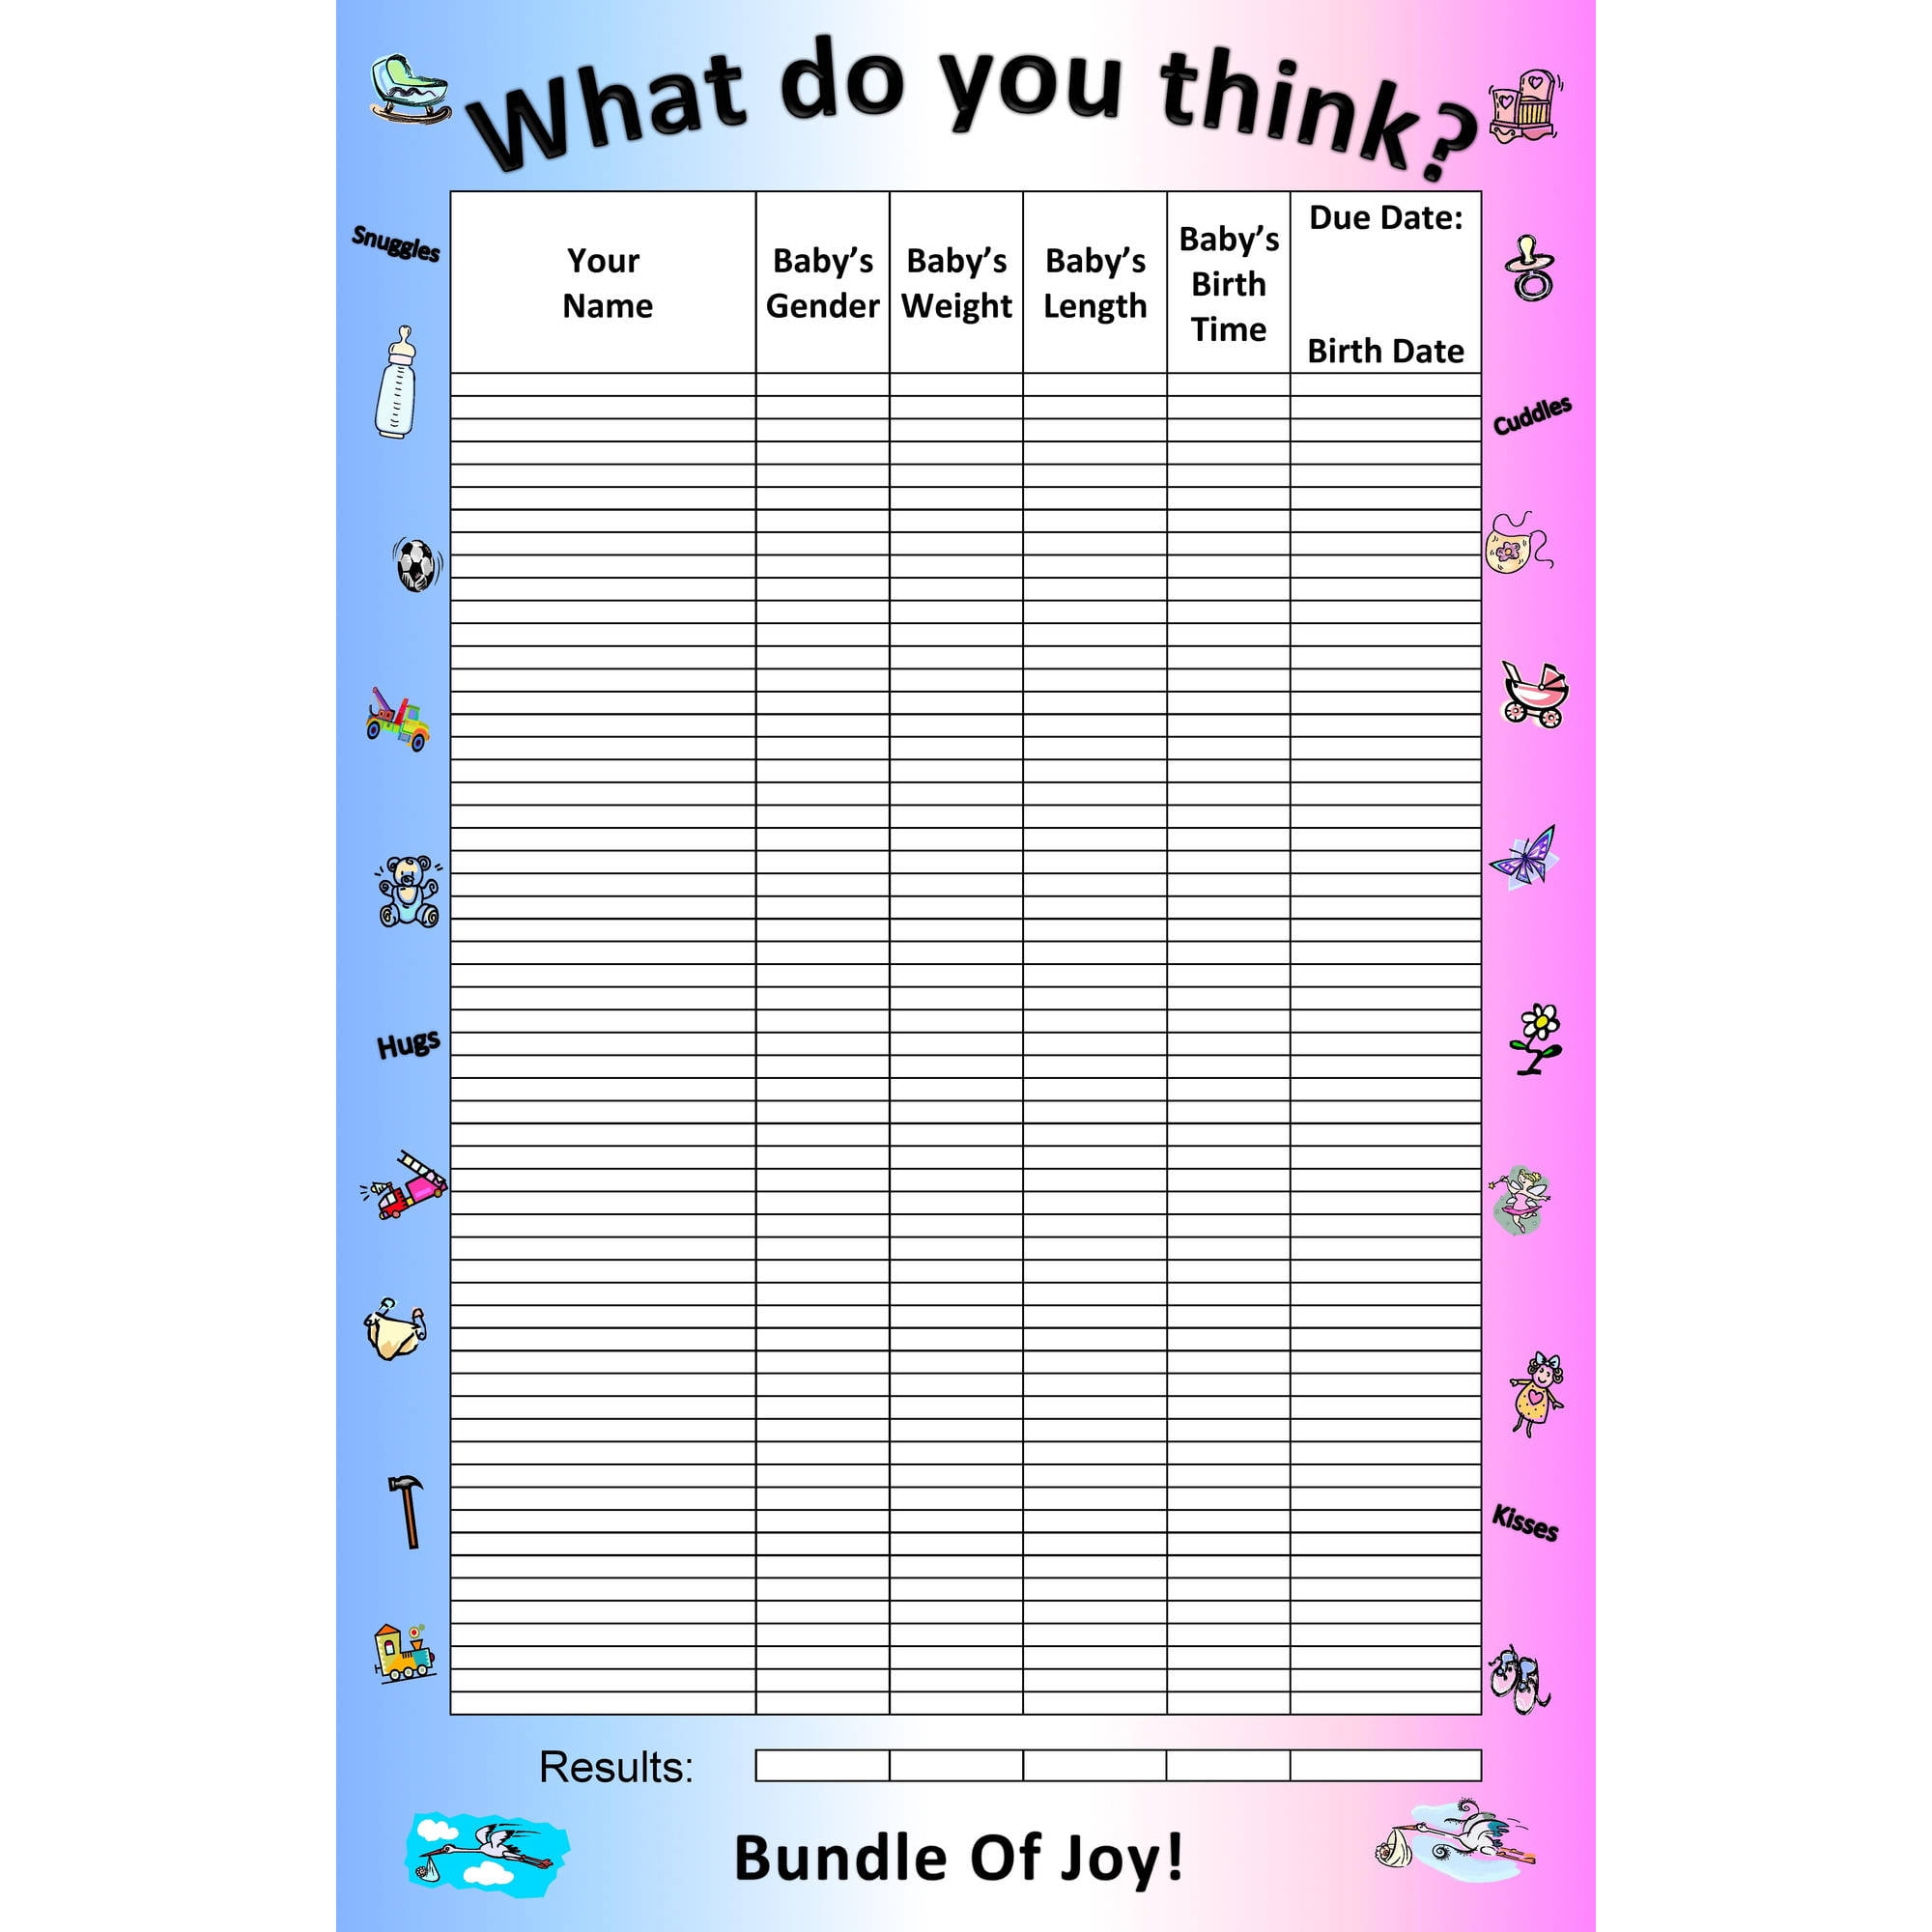 Guess the Weight/Date for Boy Pack of 12 Baby Shower Prediction Game Girl 